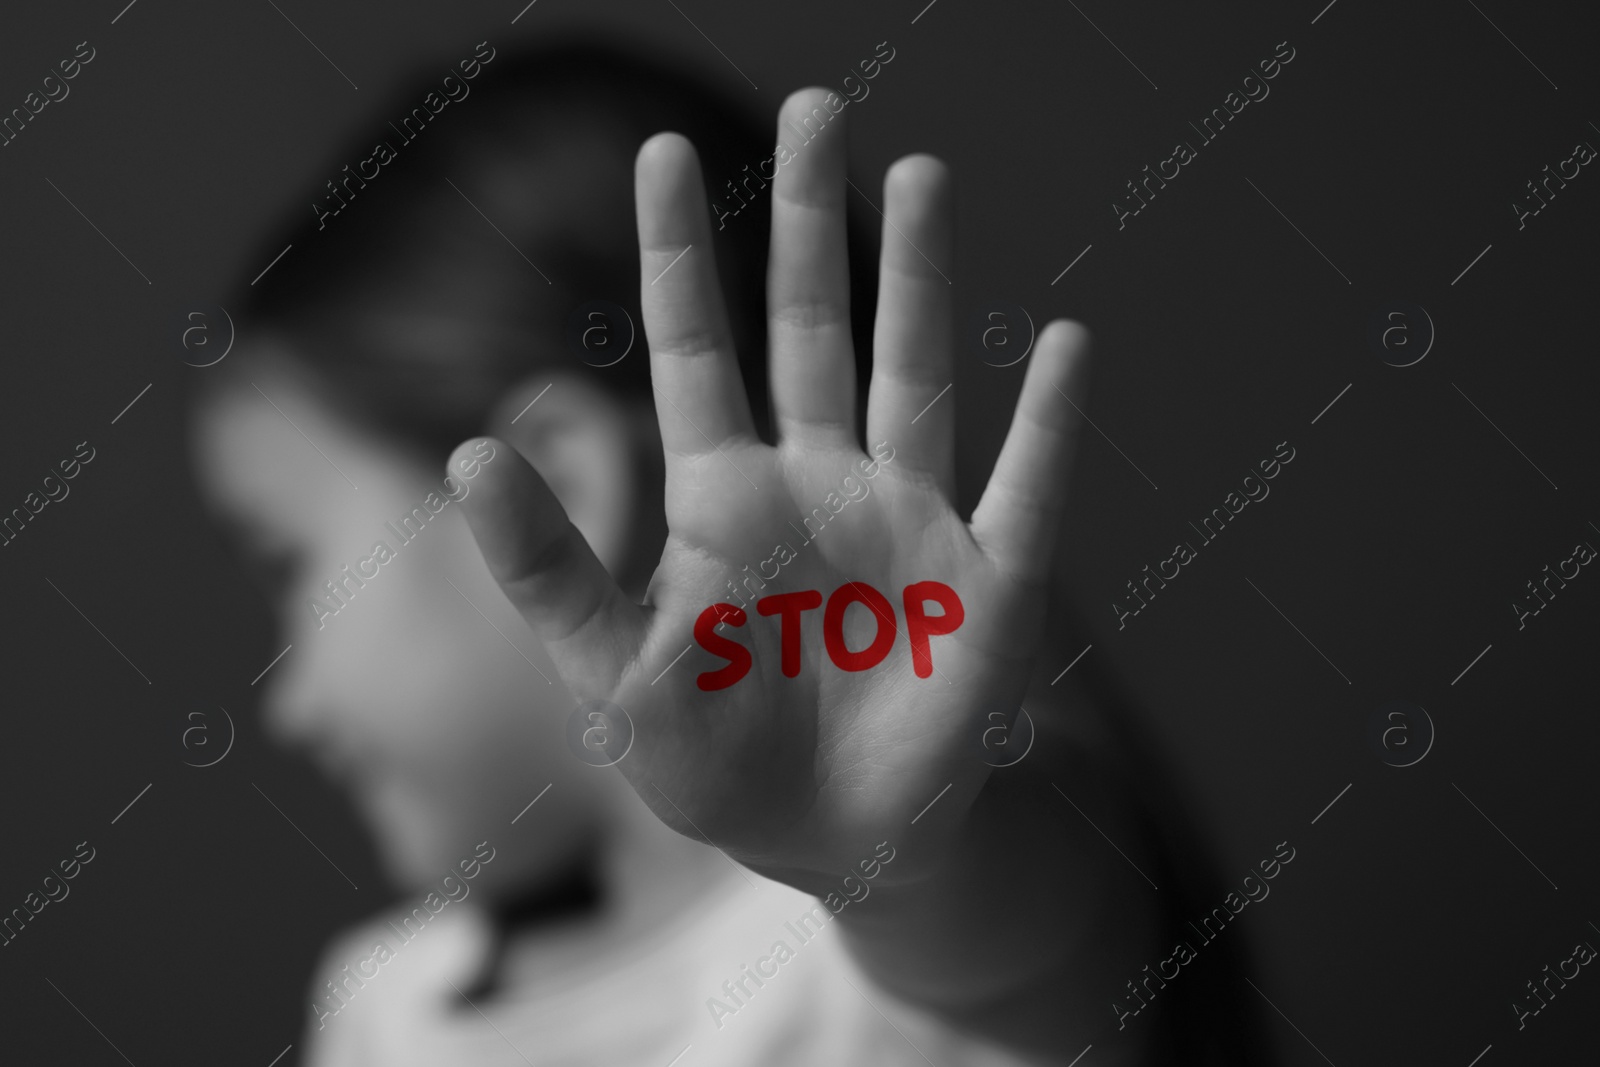 Image of No child abuse. Girl showing hand with written Stop on palm, selective focus. Black and white effect